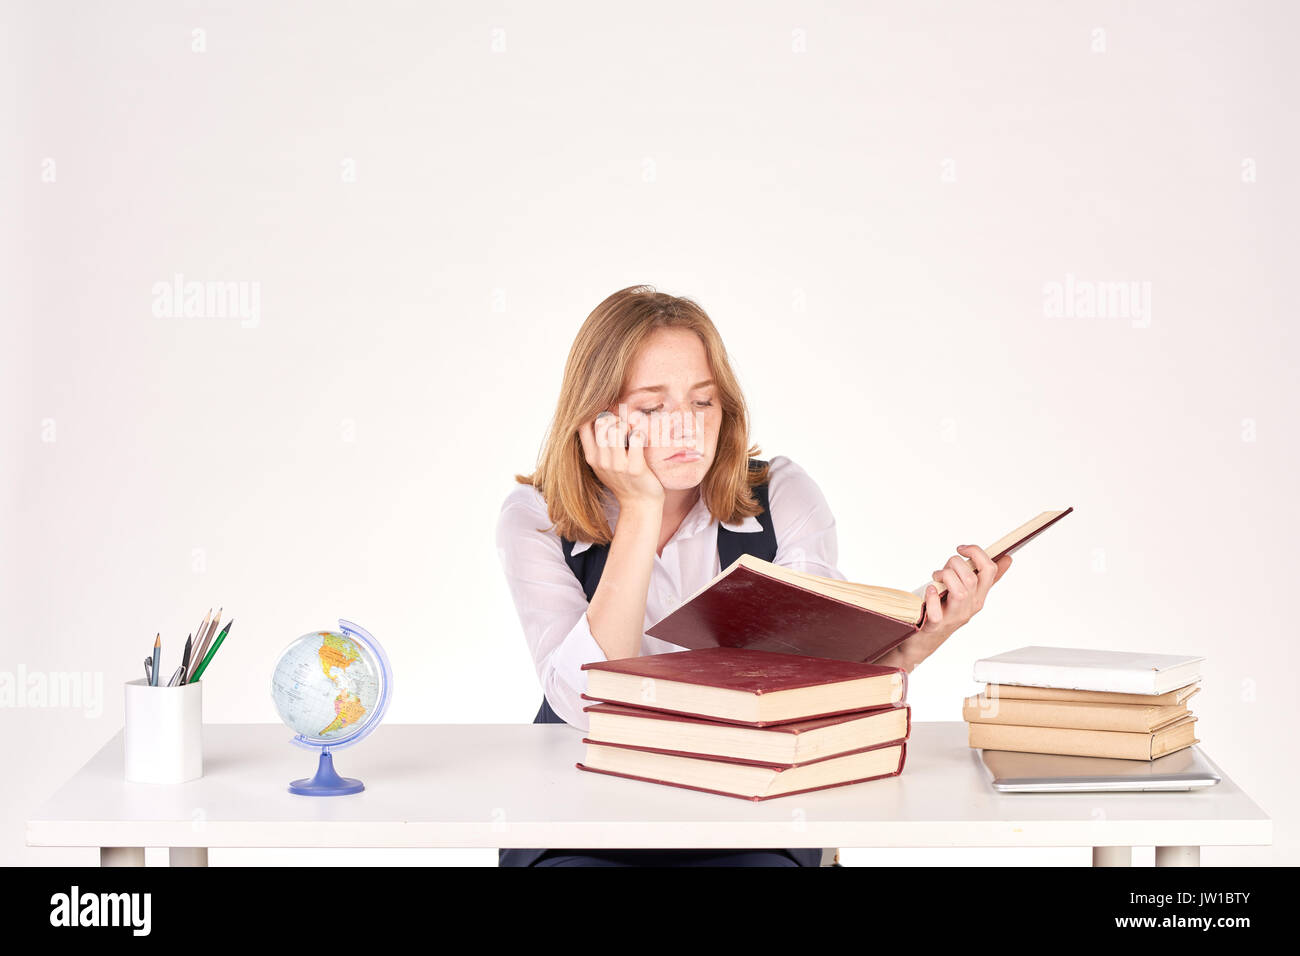 Girl studying at desk Stock Photo